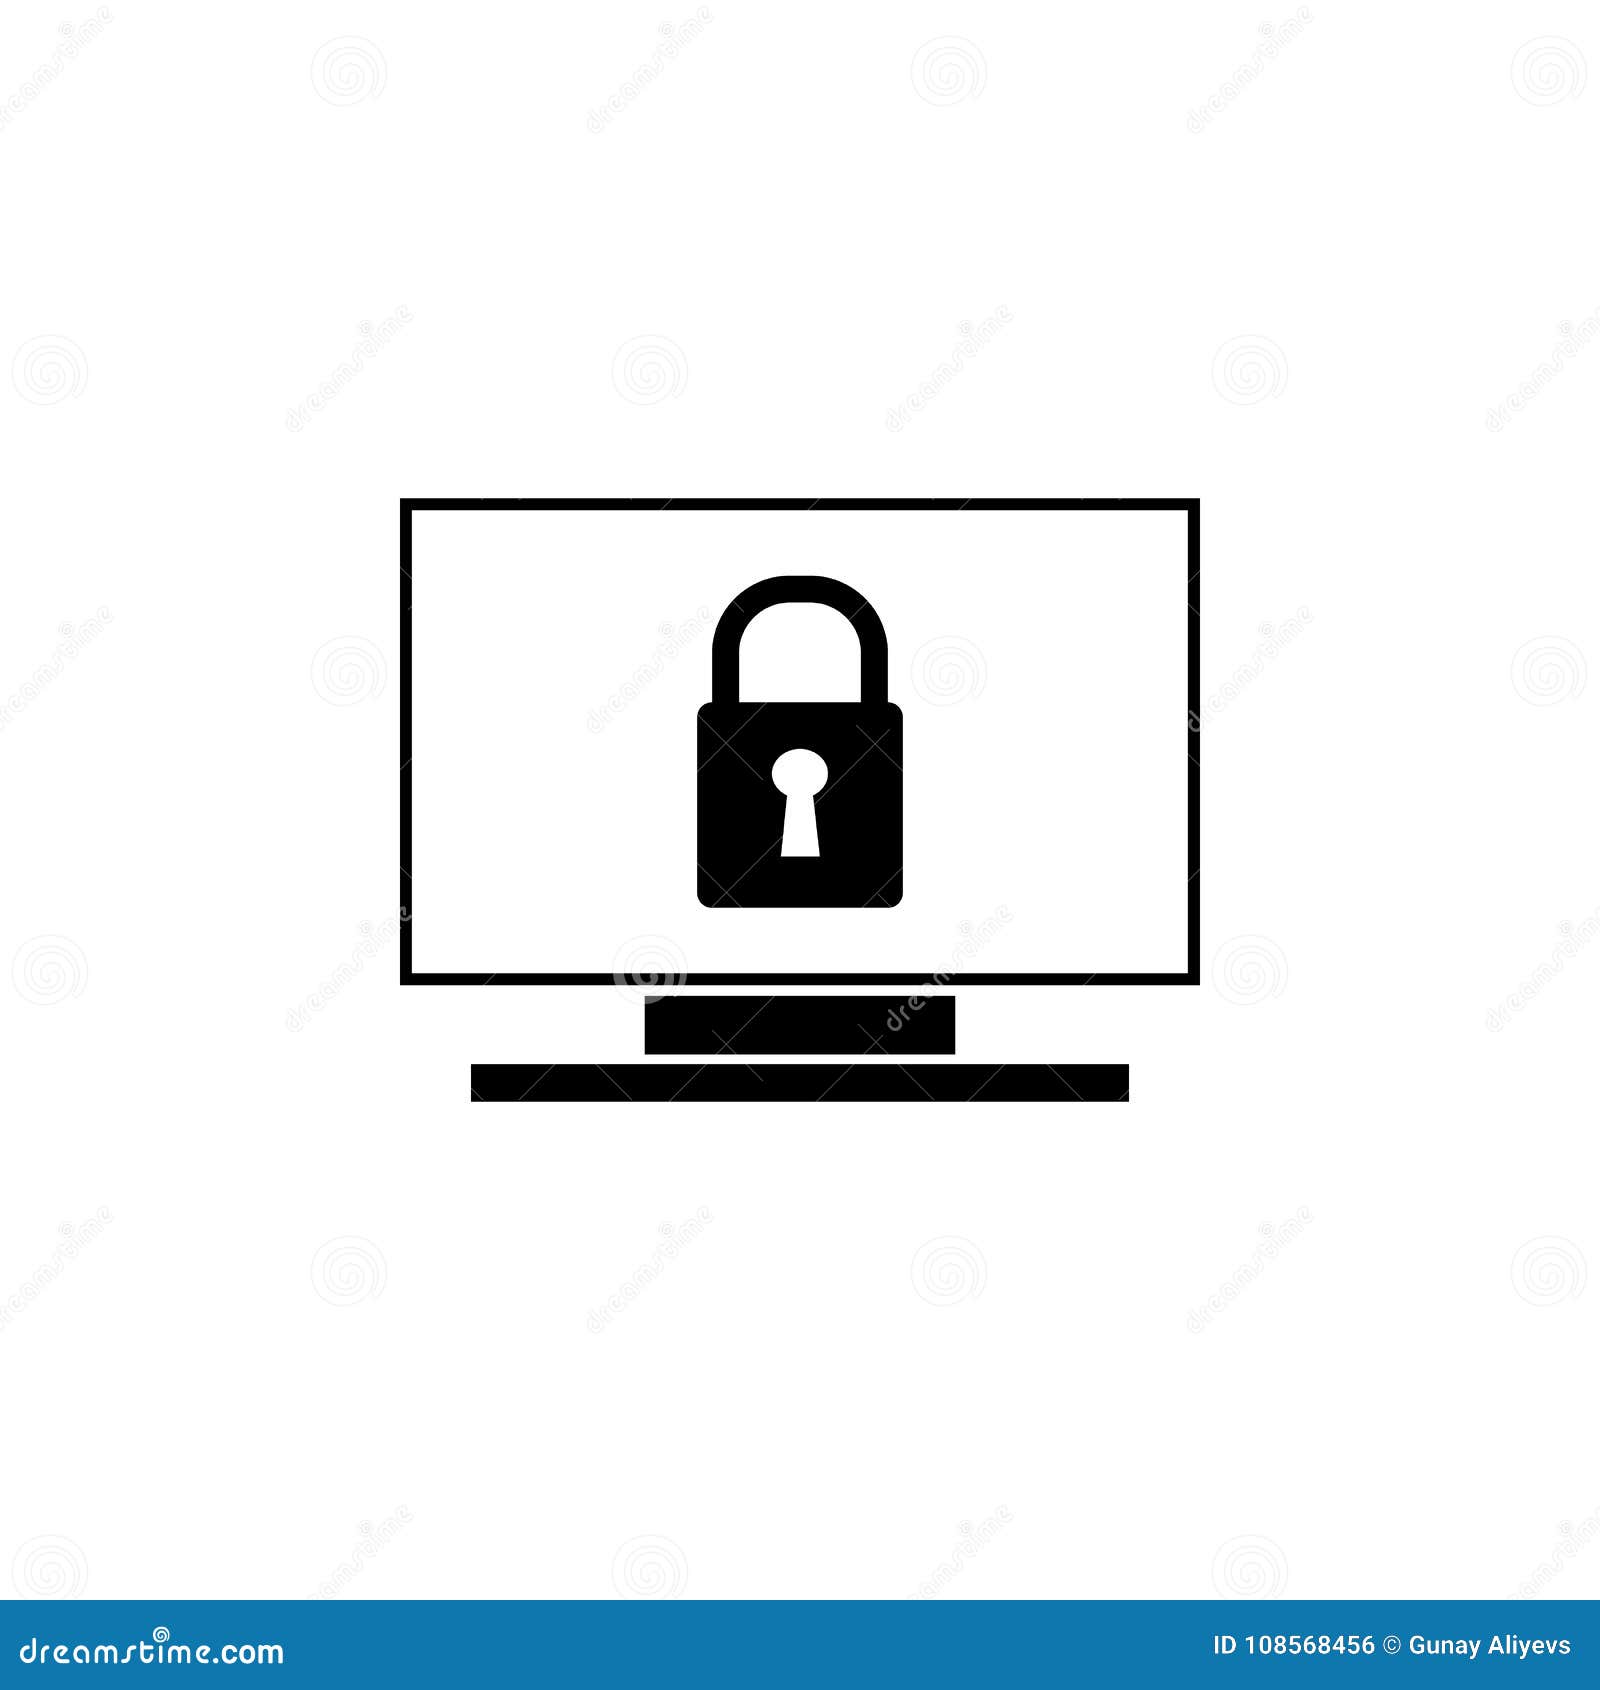 Desktop Computer And Lock On Screen Icon Elements Of Cyber